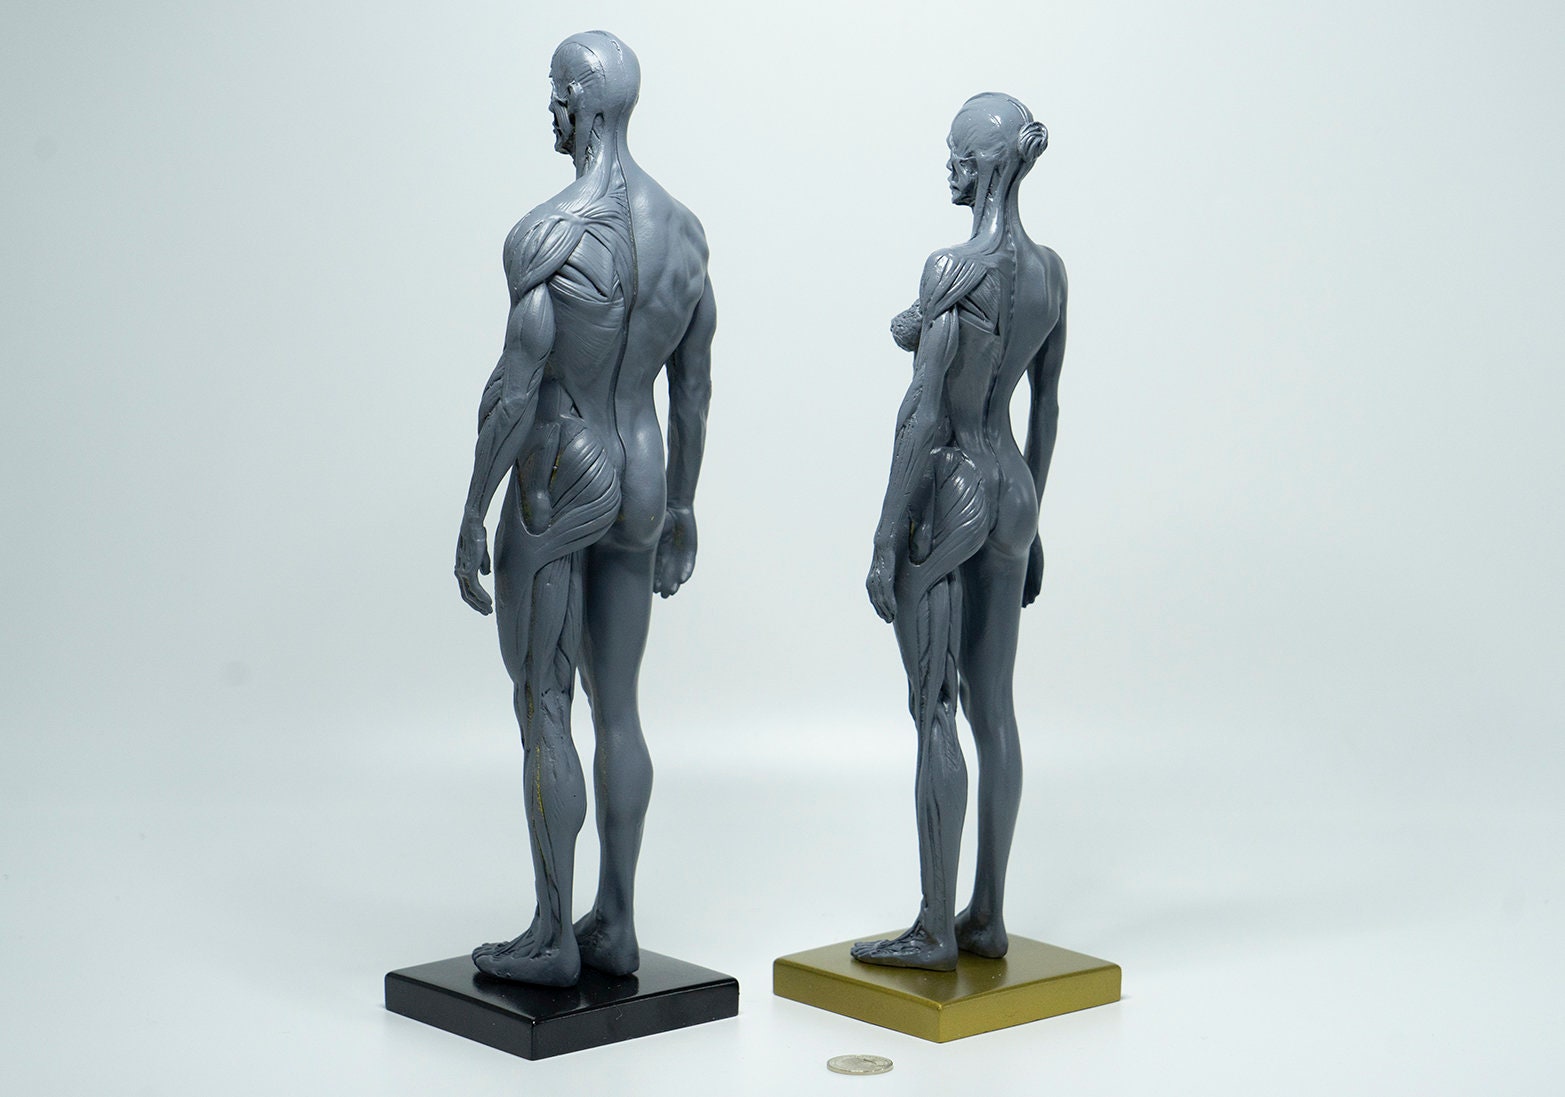 Image of Artist Anatomy Tool - Male & Female Sculpture Statue | Human Body Figure Model for Anatomy Drawing & Visual Art | Art Supplies, Home Decor, Art Student Tools, Muscle Anatomy, Artist Bust